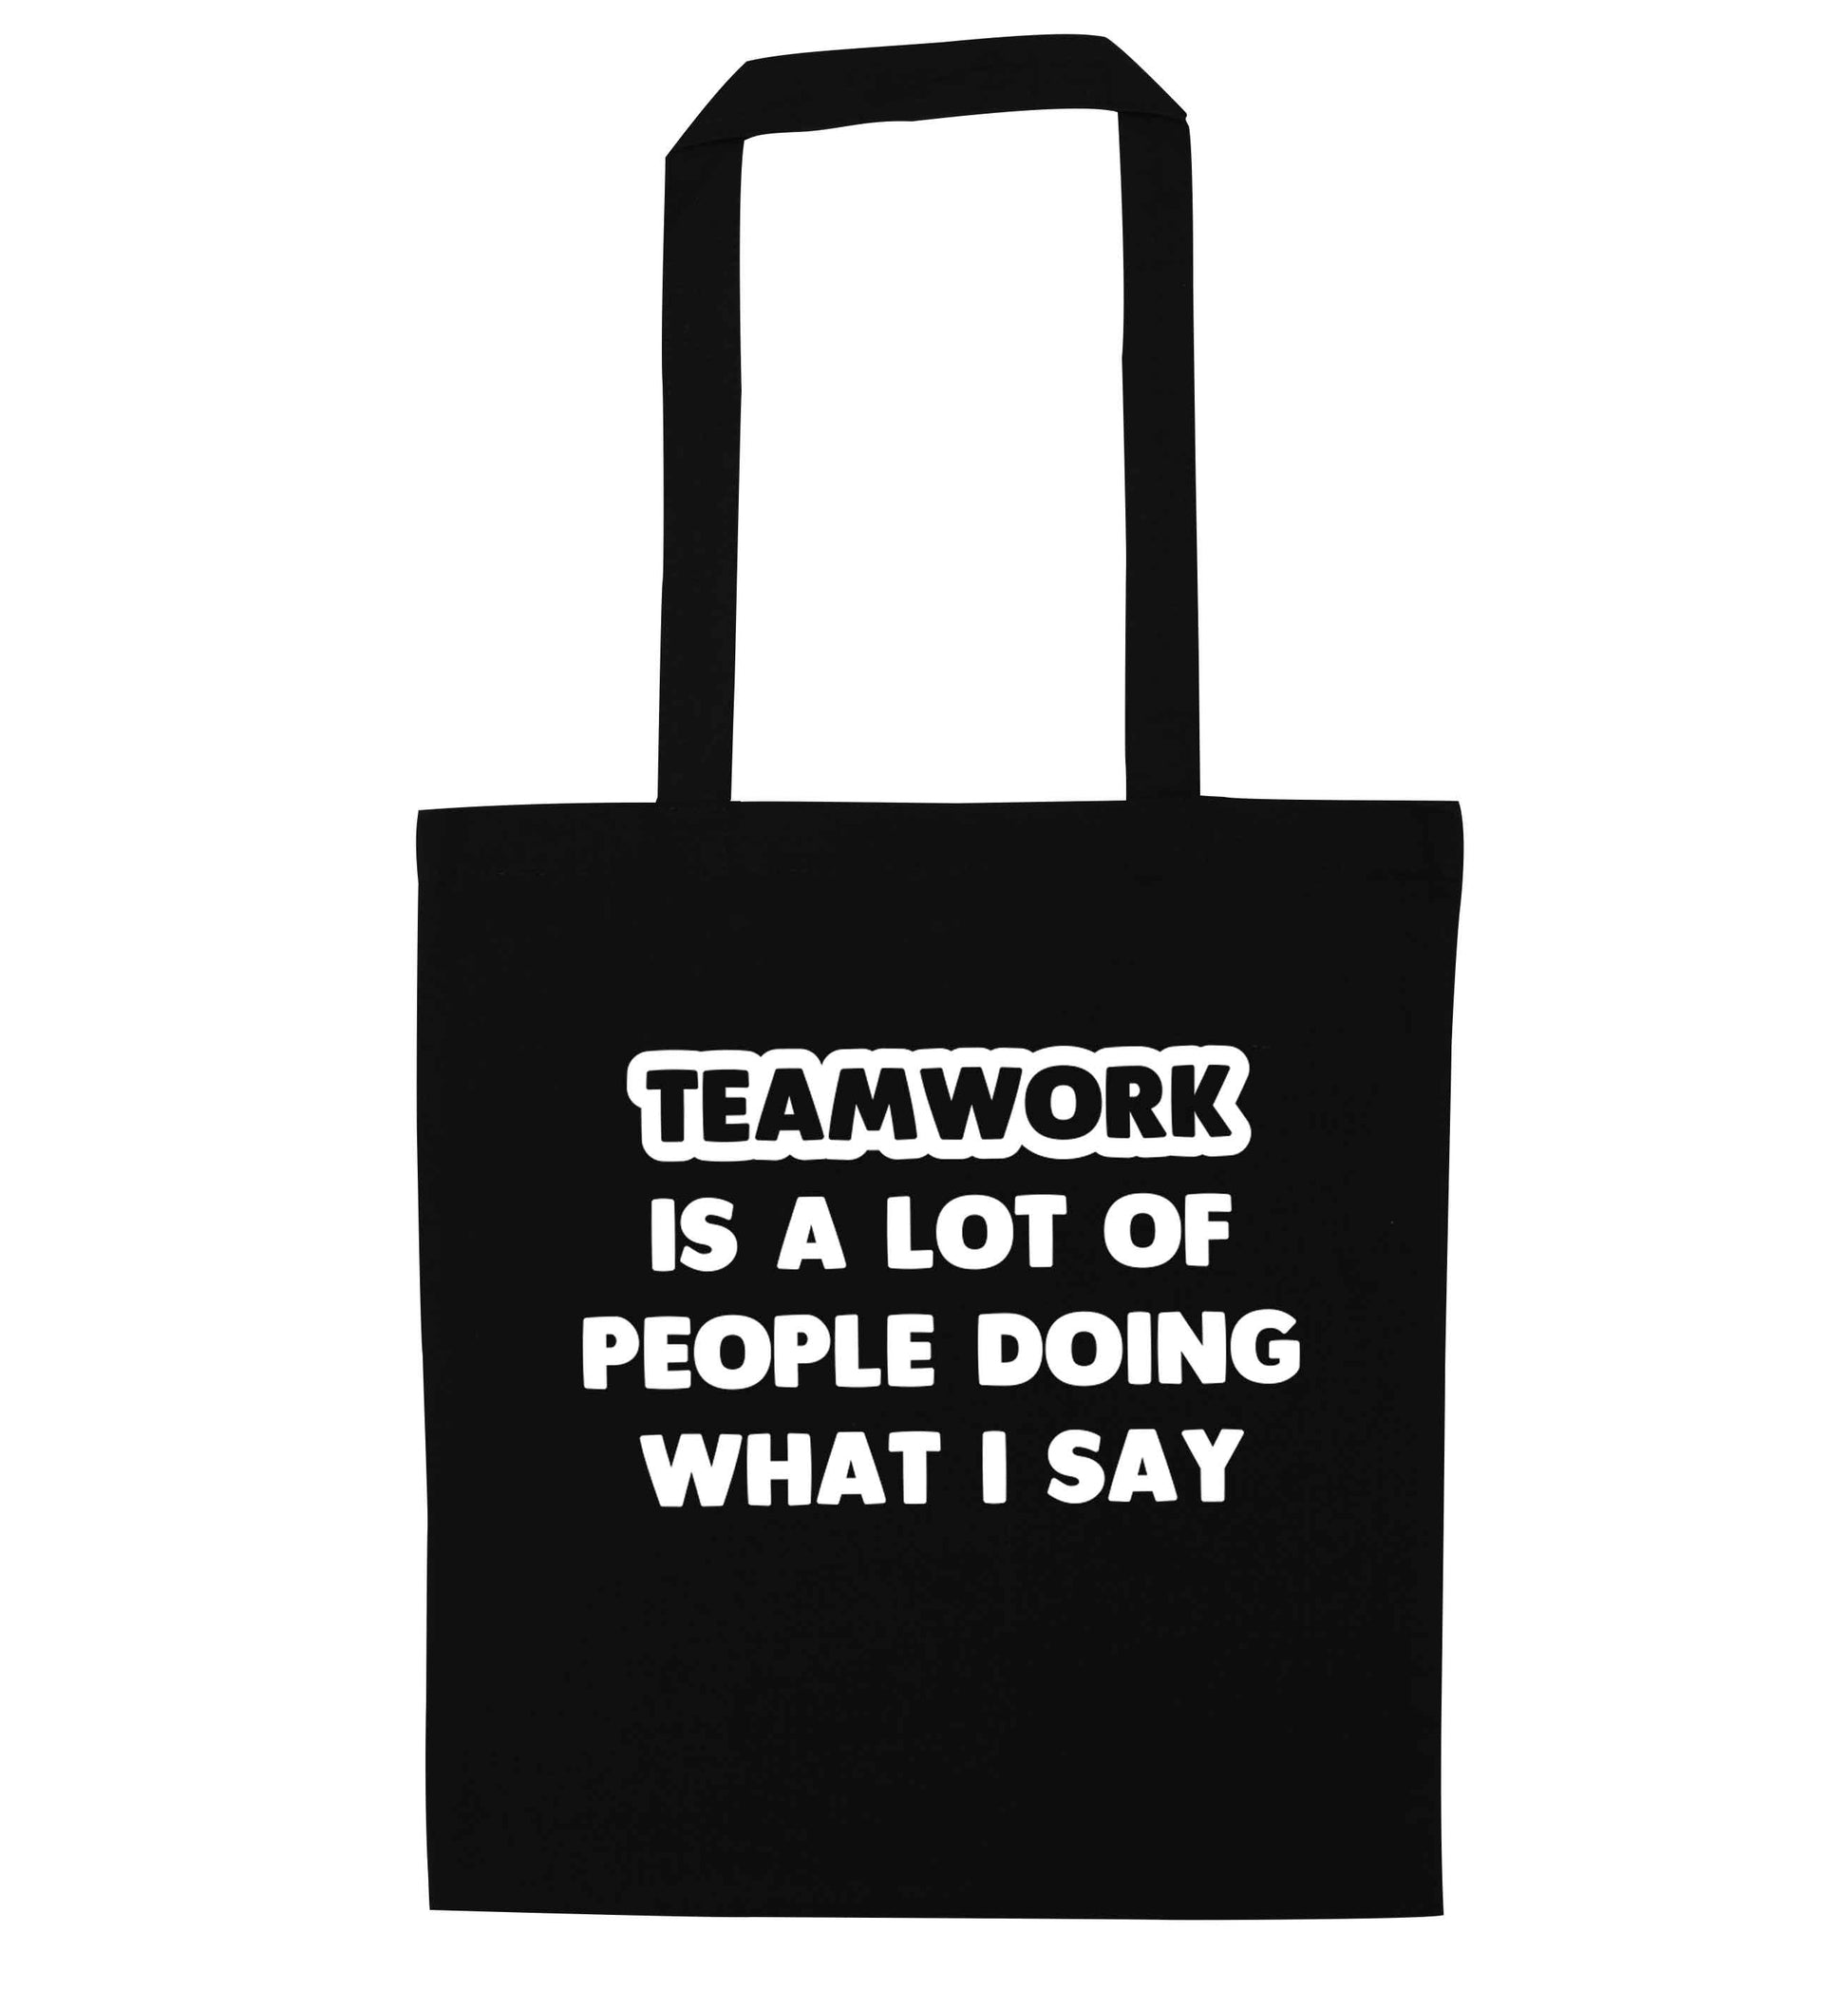 Teamwork is a lot of people doing what I say black tote bag